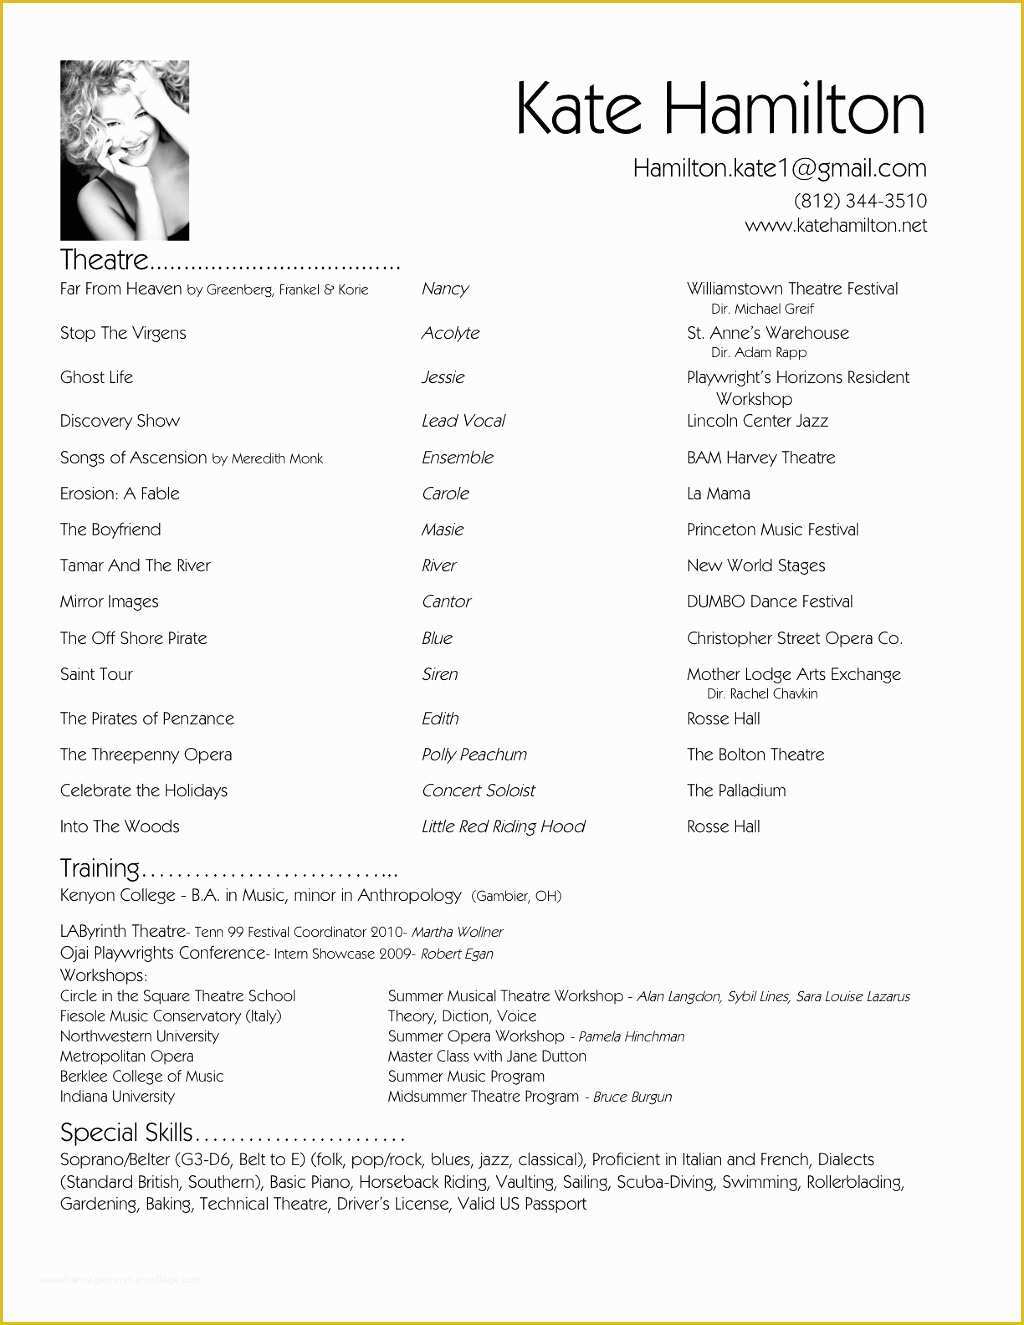 Free Resume Templates for Stay at Home Moms Of 14 15 Sample Resumes for Stay at Home Moms